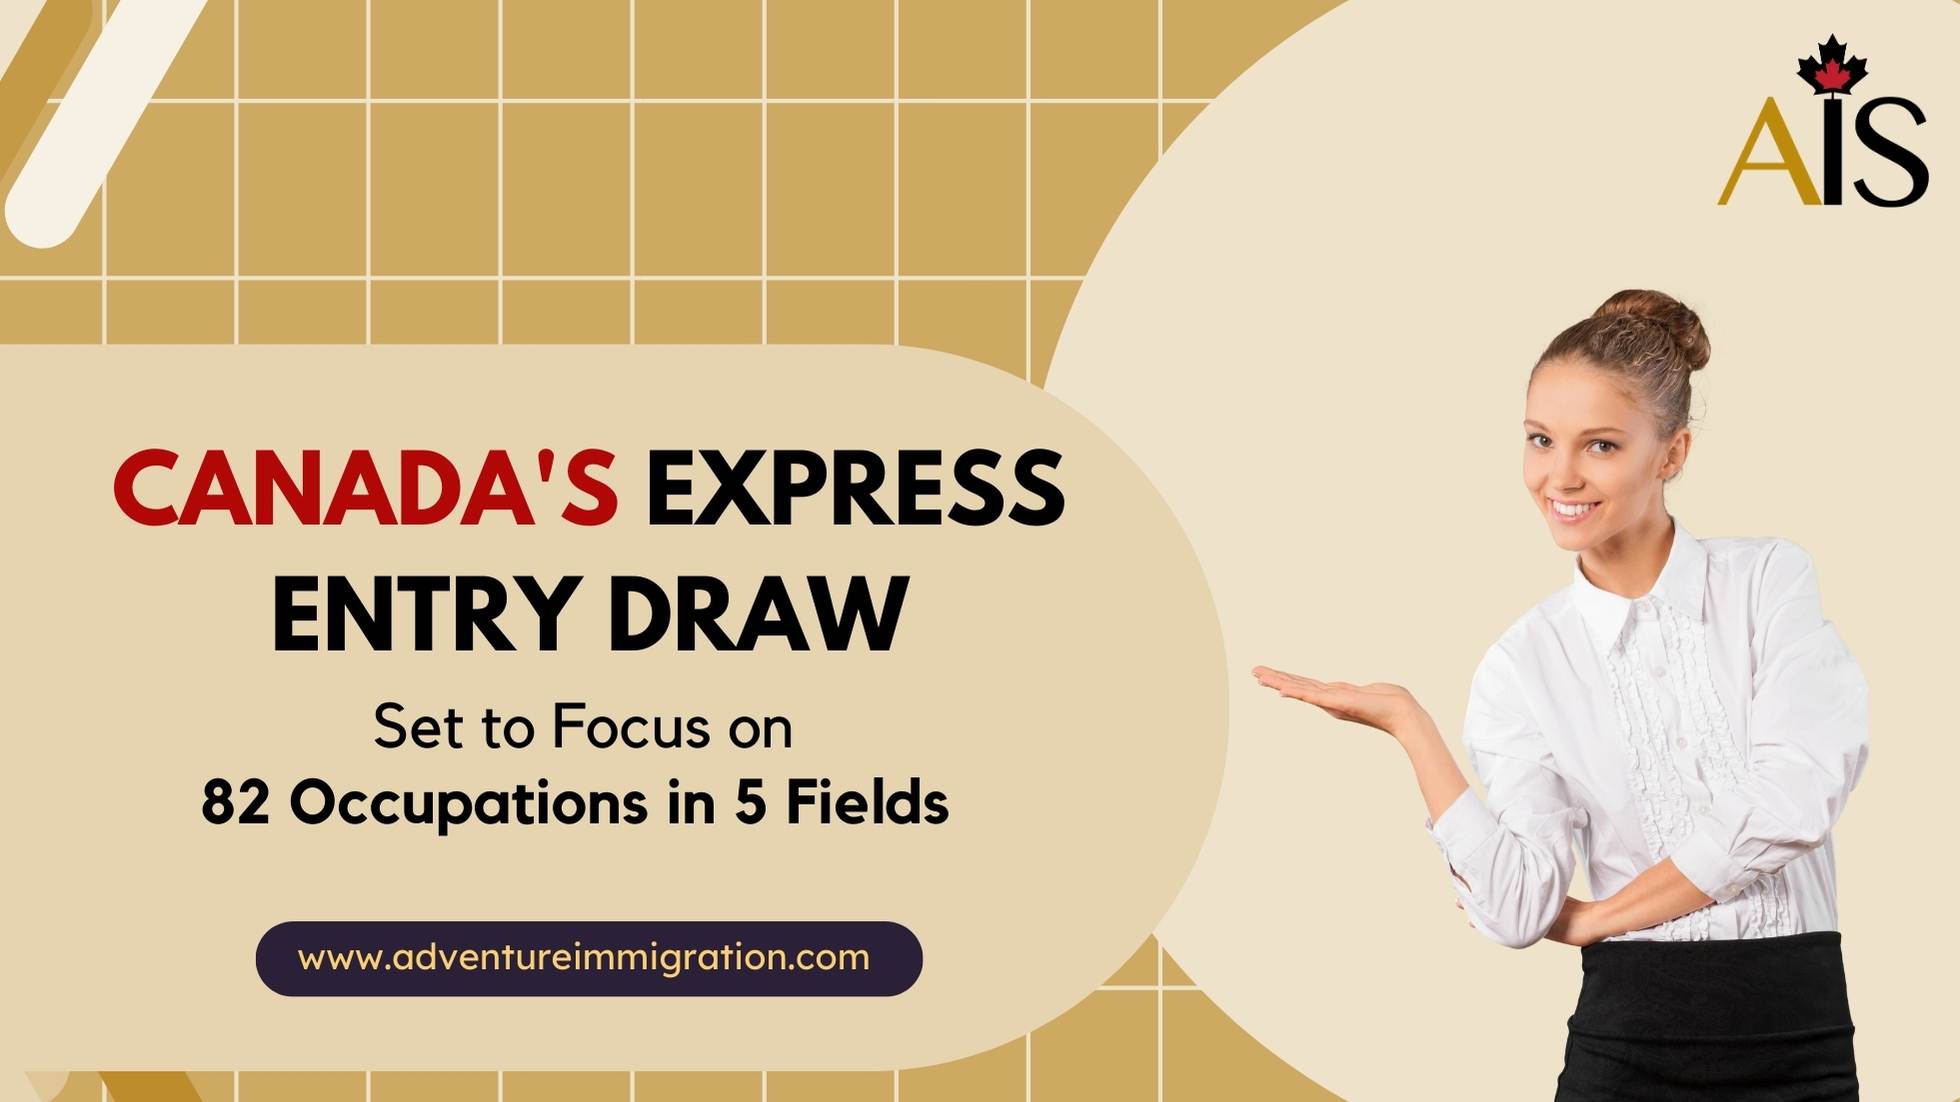 Canada's Express Entry Draw Set to Focus on 82 Occupations in 5 Fields